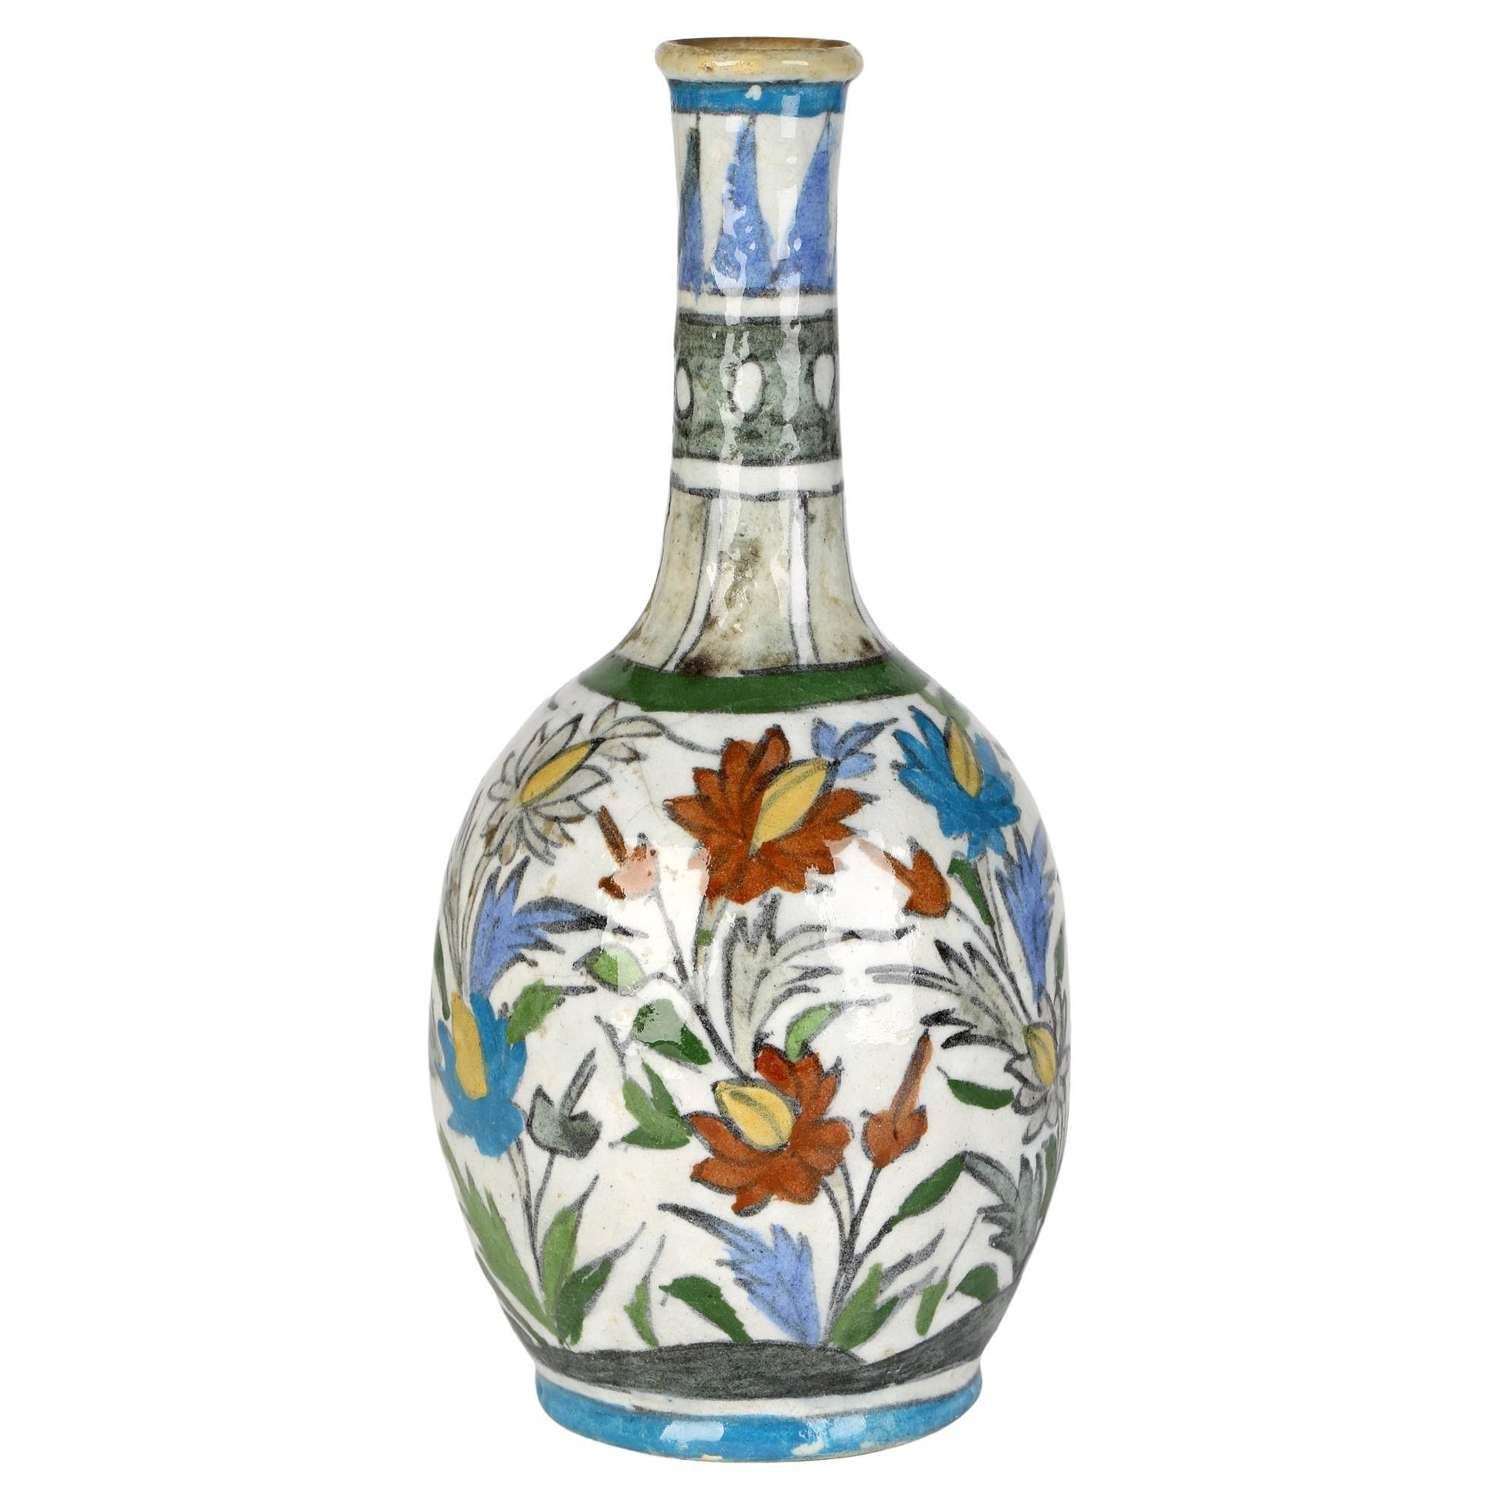 Persian Art Pottery Bottle Shape Vase Hand-Painted with Floral Designs